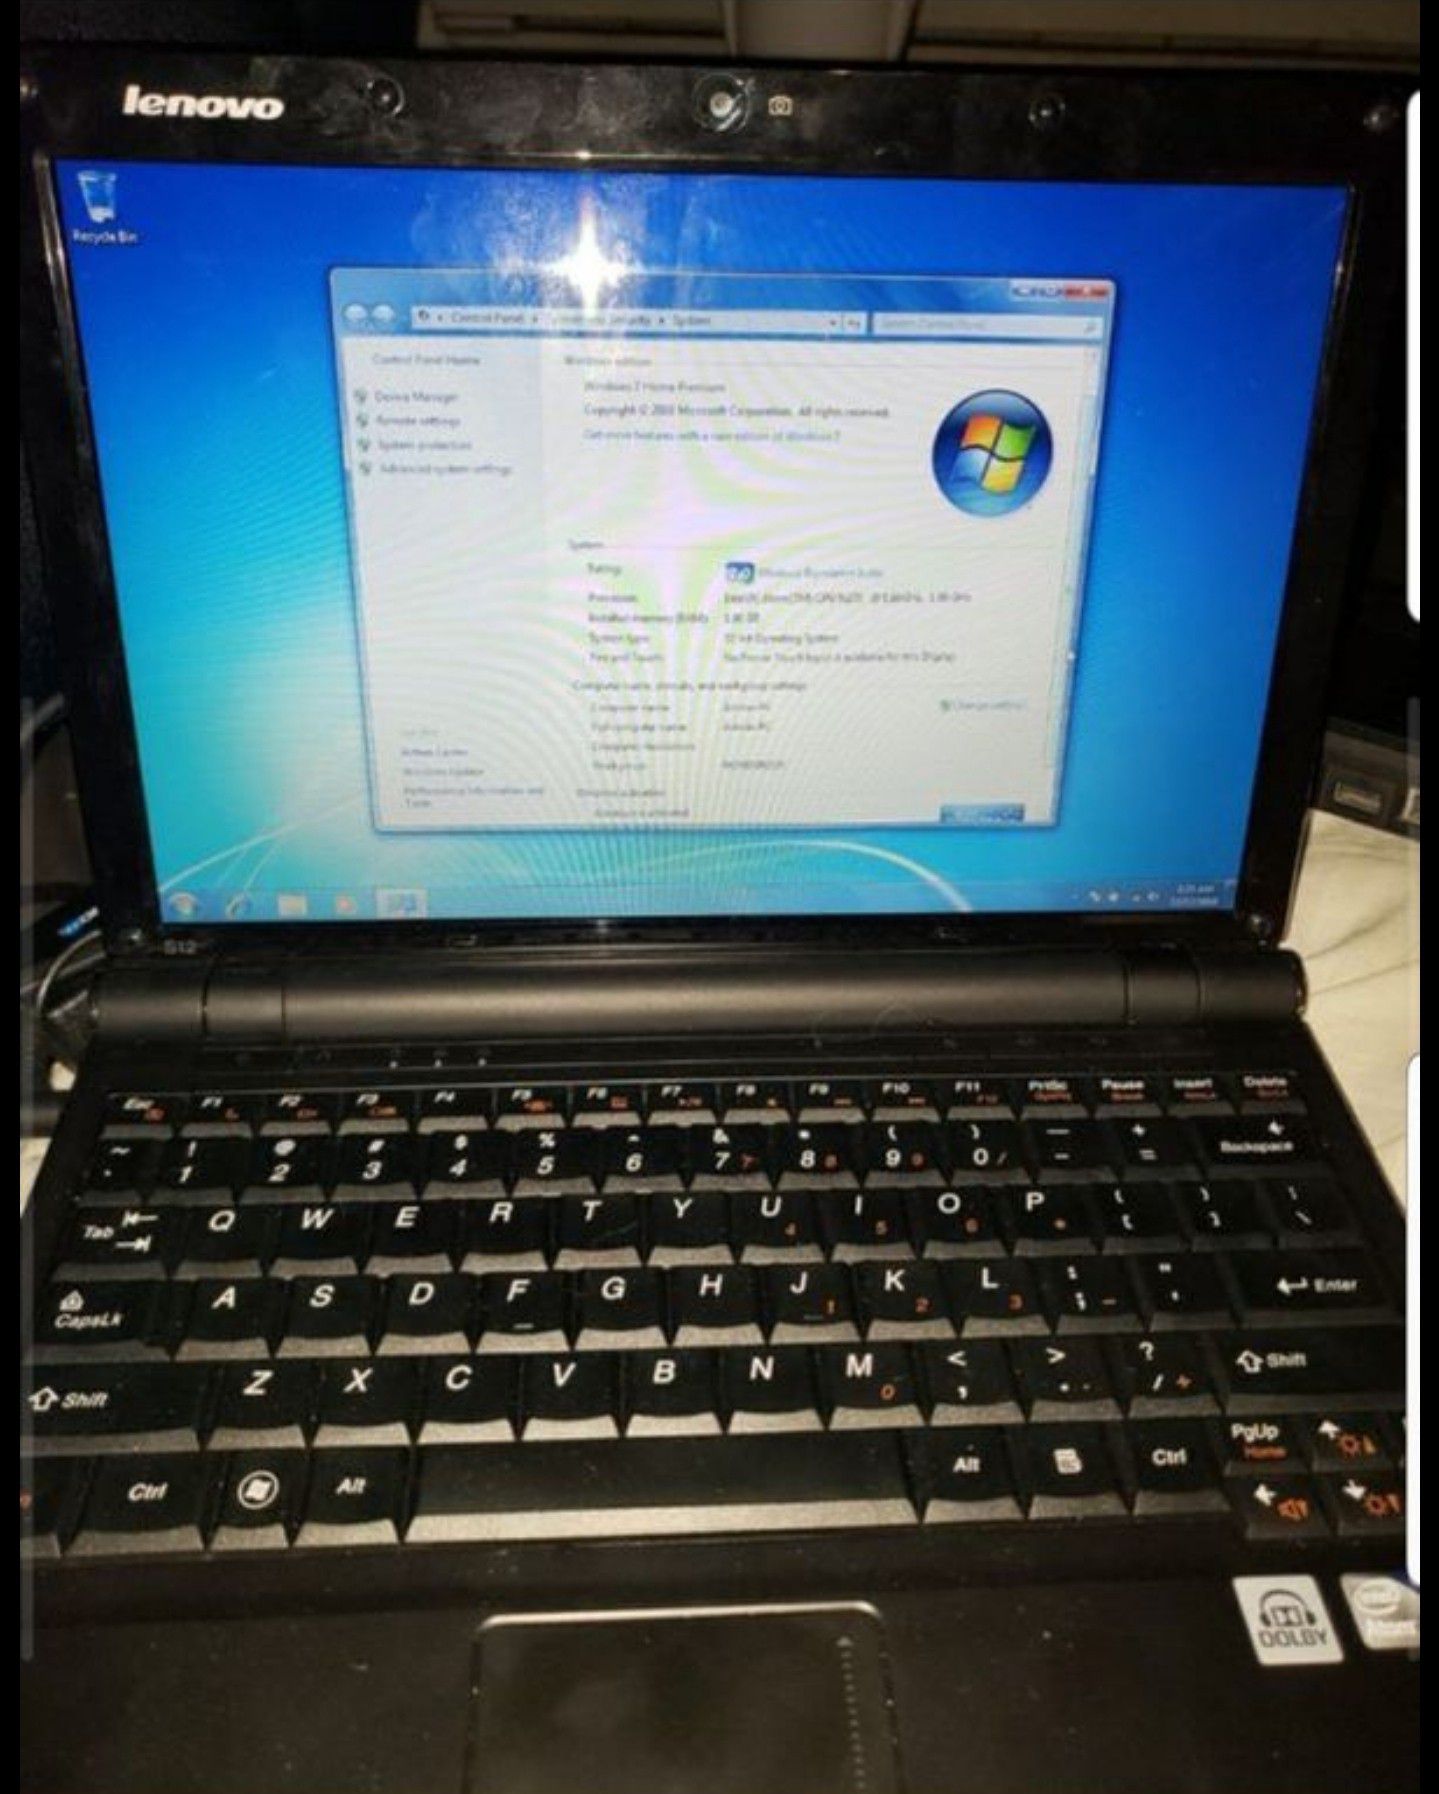 Lenovo Ideapad S12 12" Laptop PC For office and student